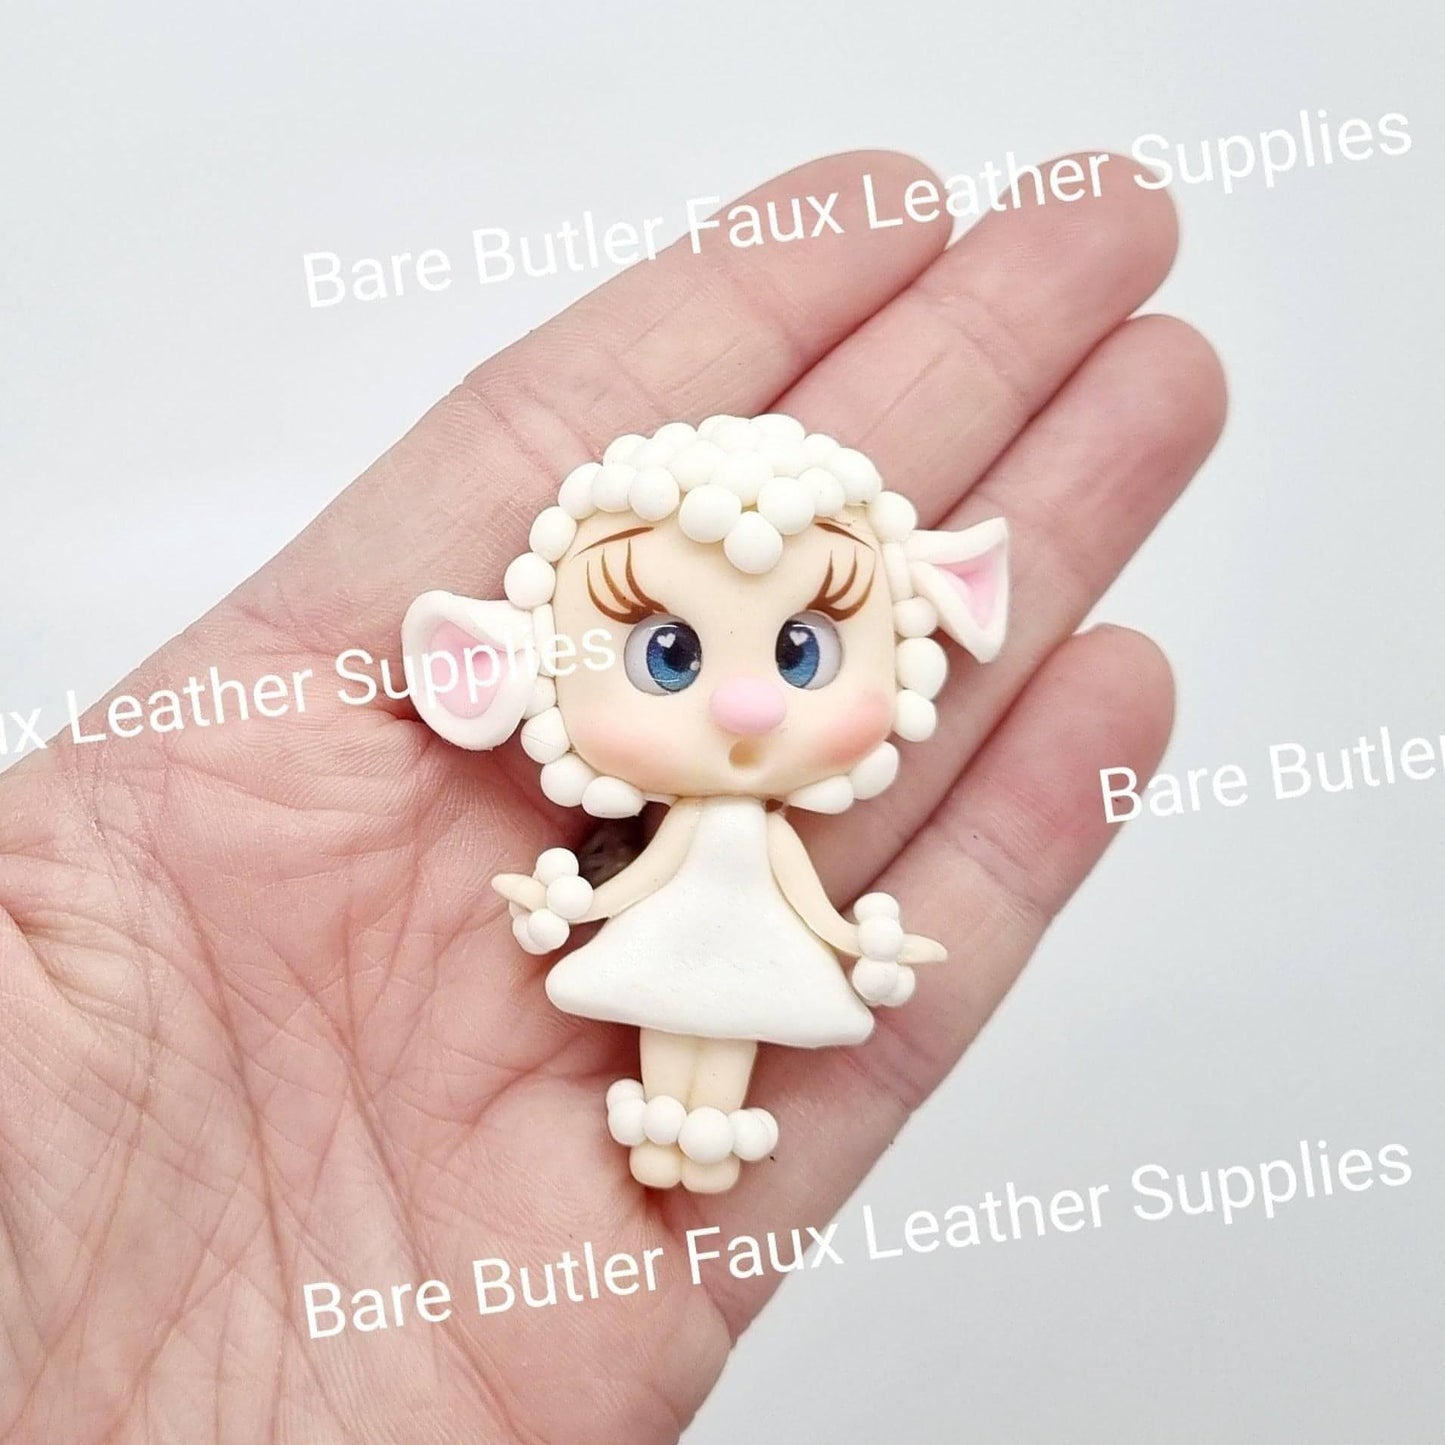 Mary's Lamb - Clay, Clays, lamb - Bare Butler Faux Leather Supplies 